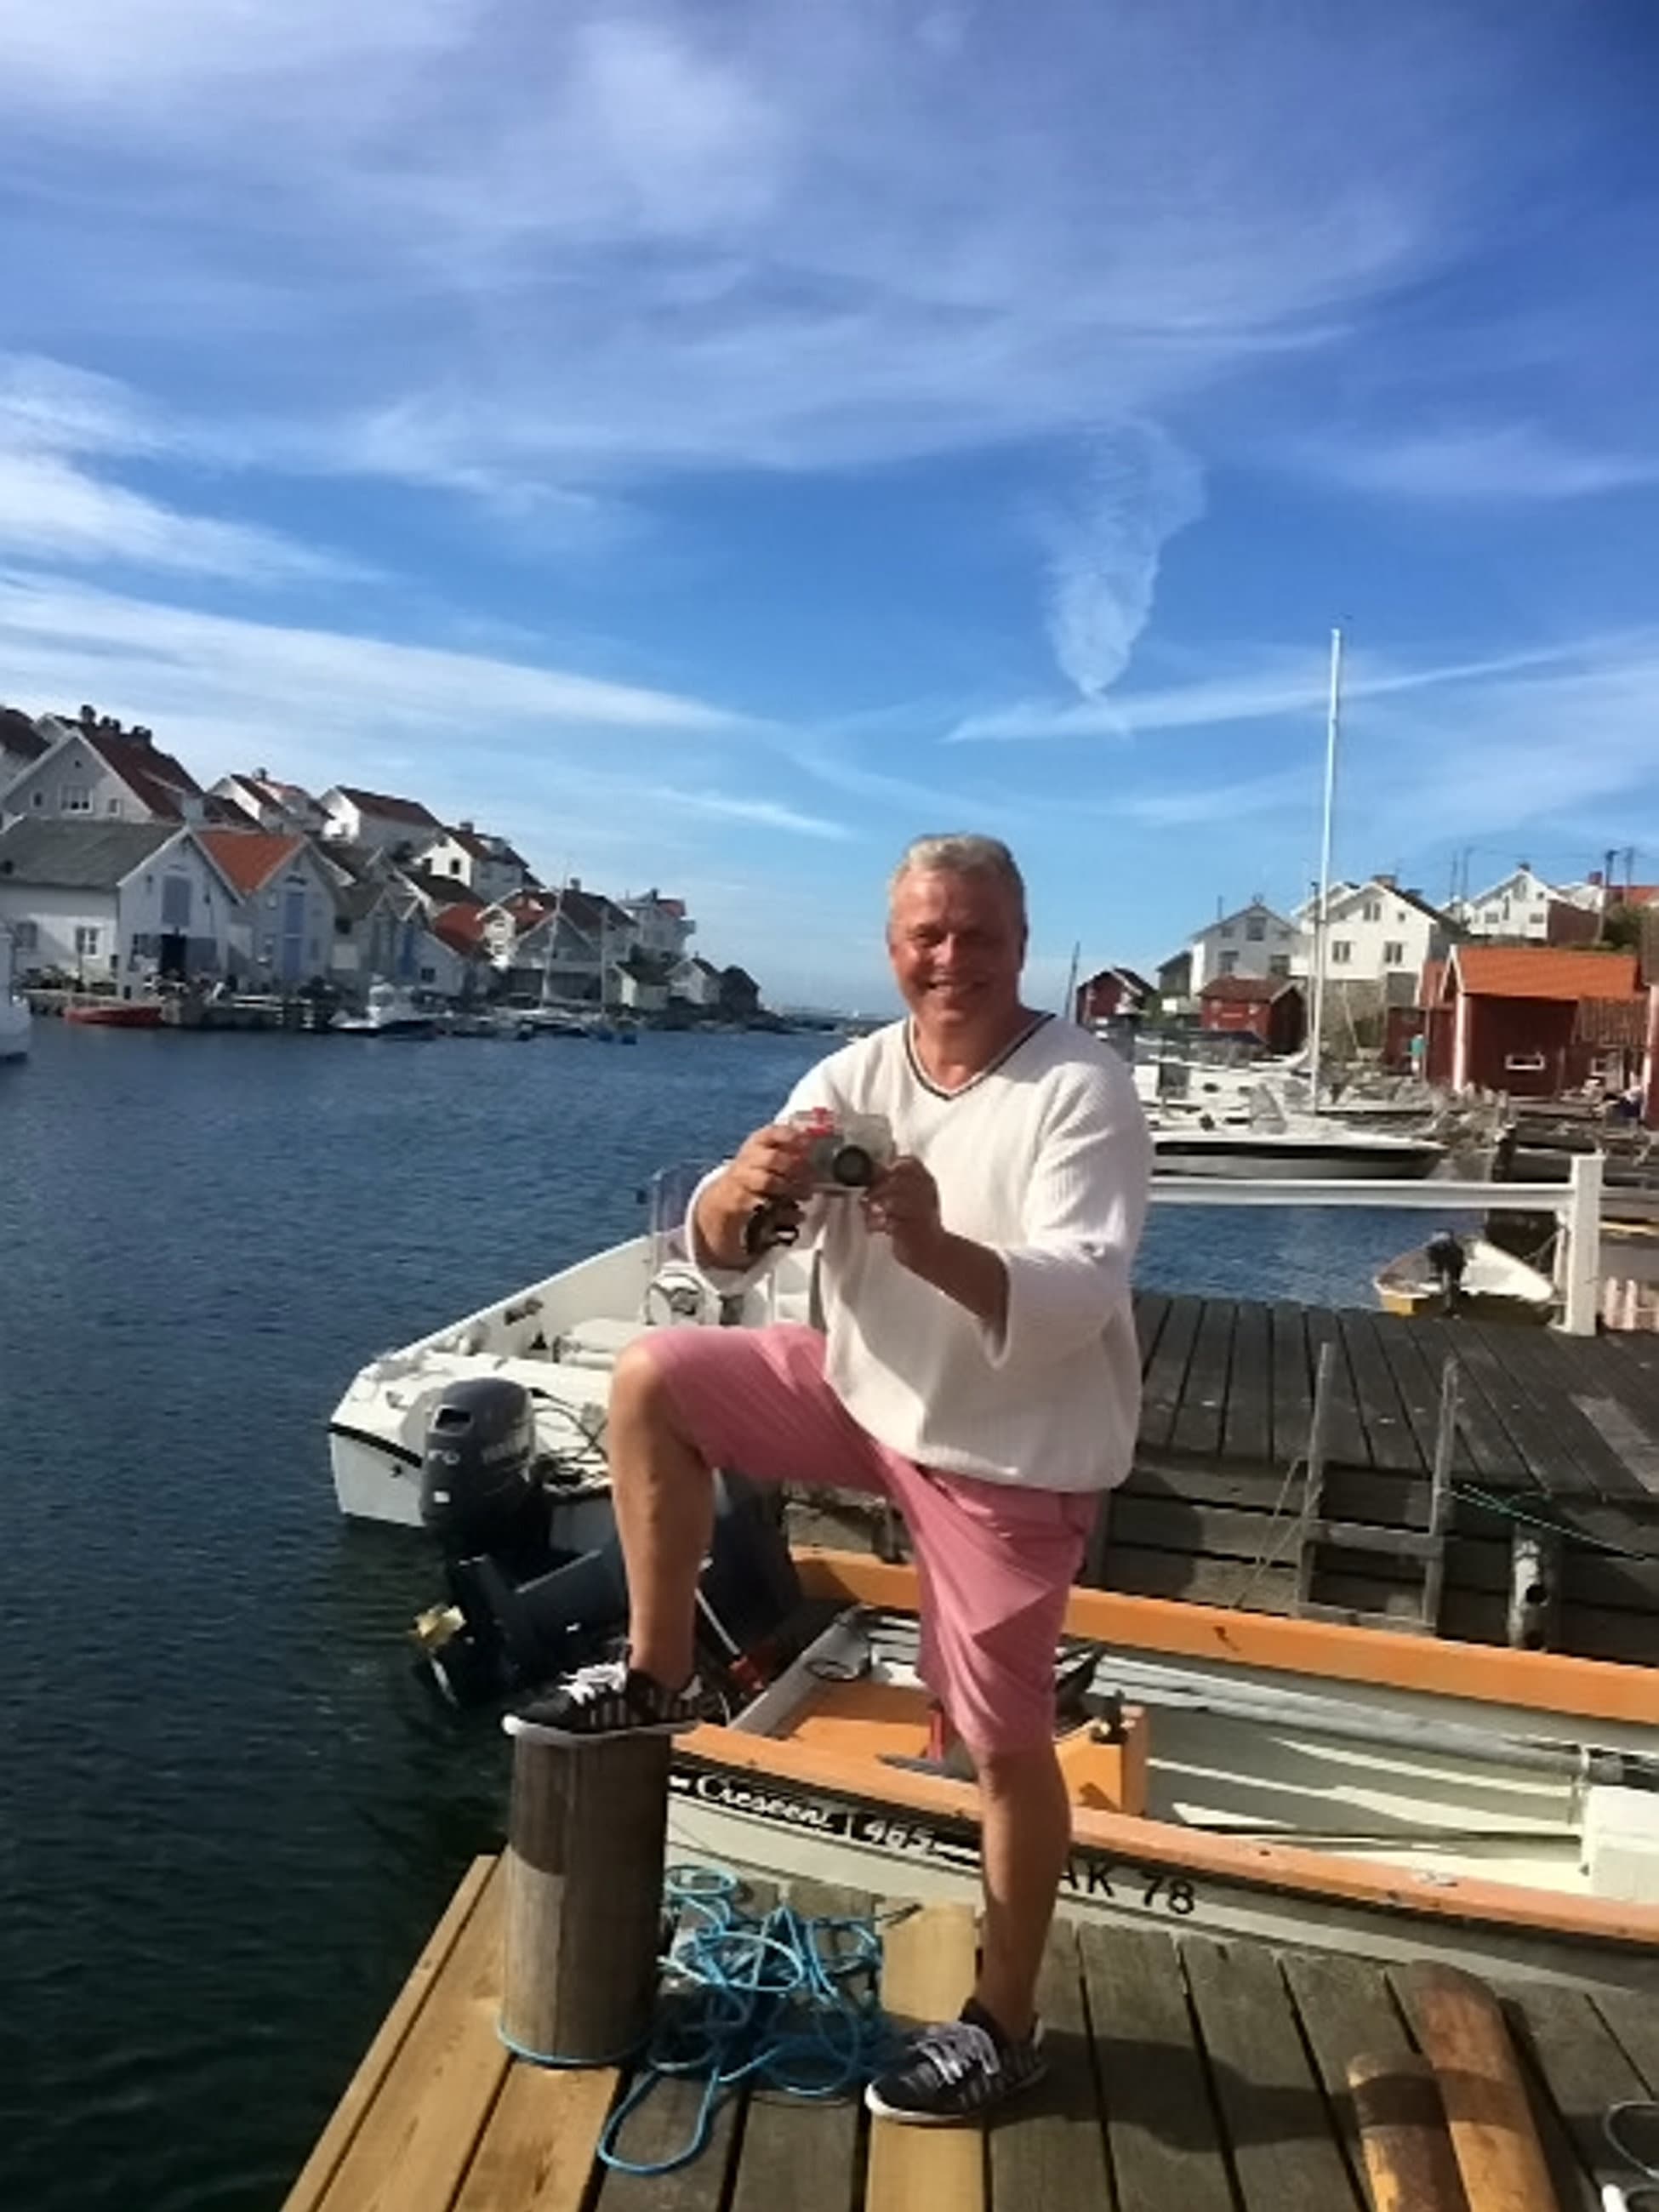 Lars Mossberg pictured on the small Swedish island where he lives holding Adele Devonshire's camera. Source: SWNS